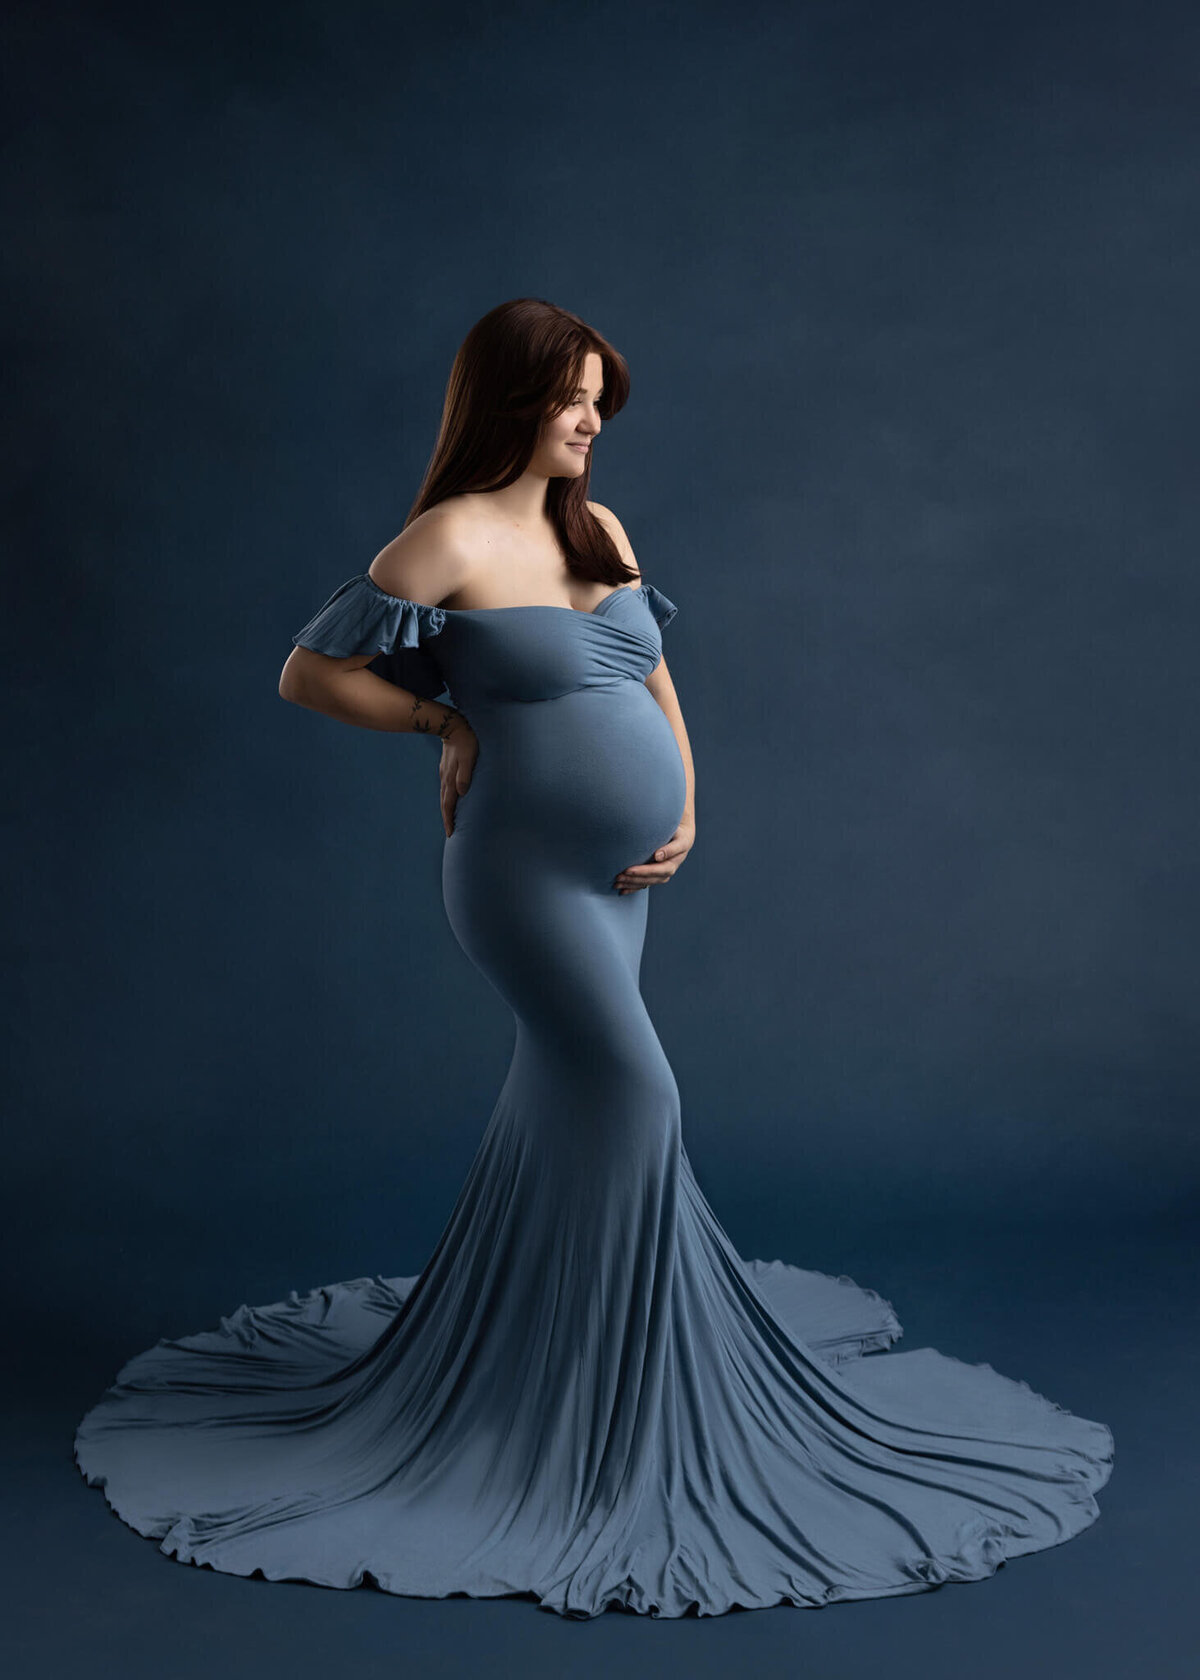 preagnant woman wearing a blue dress holding her belly